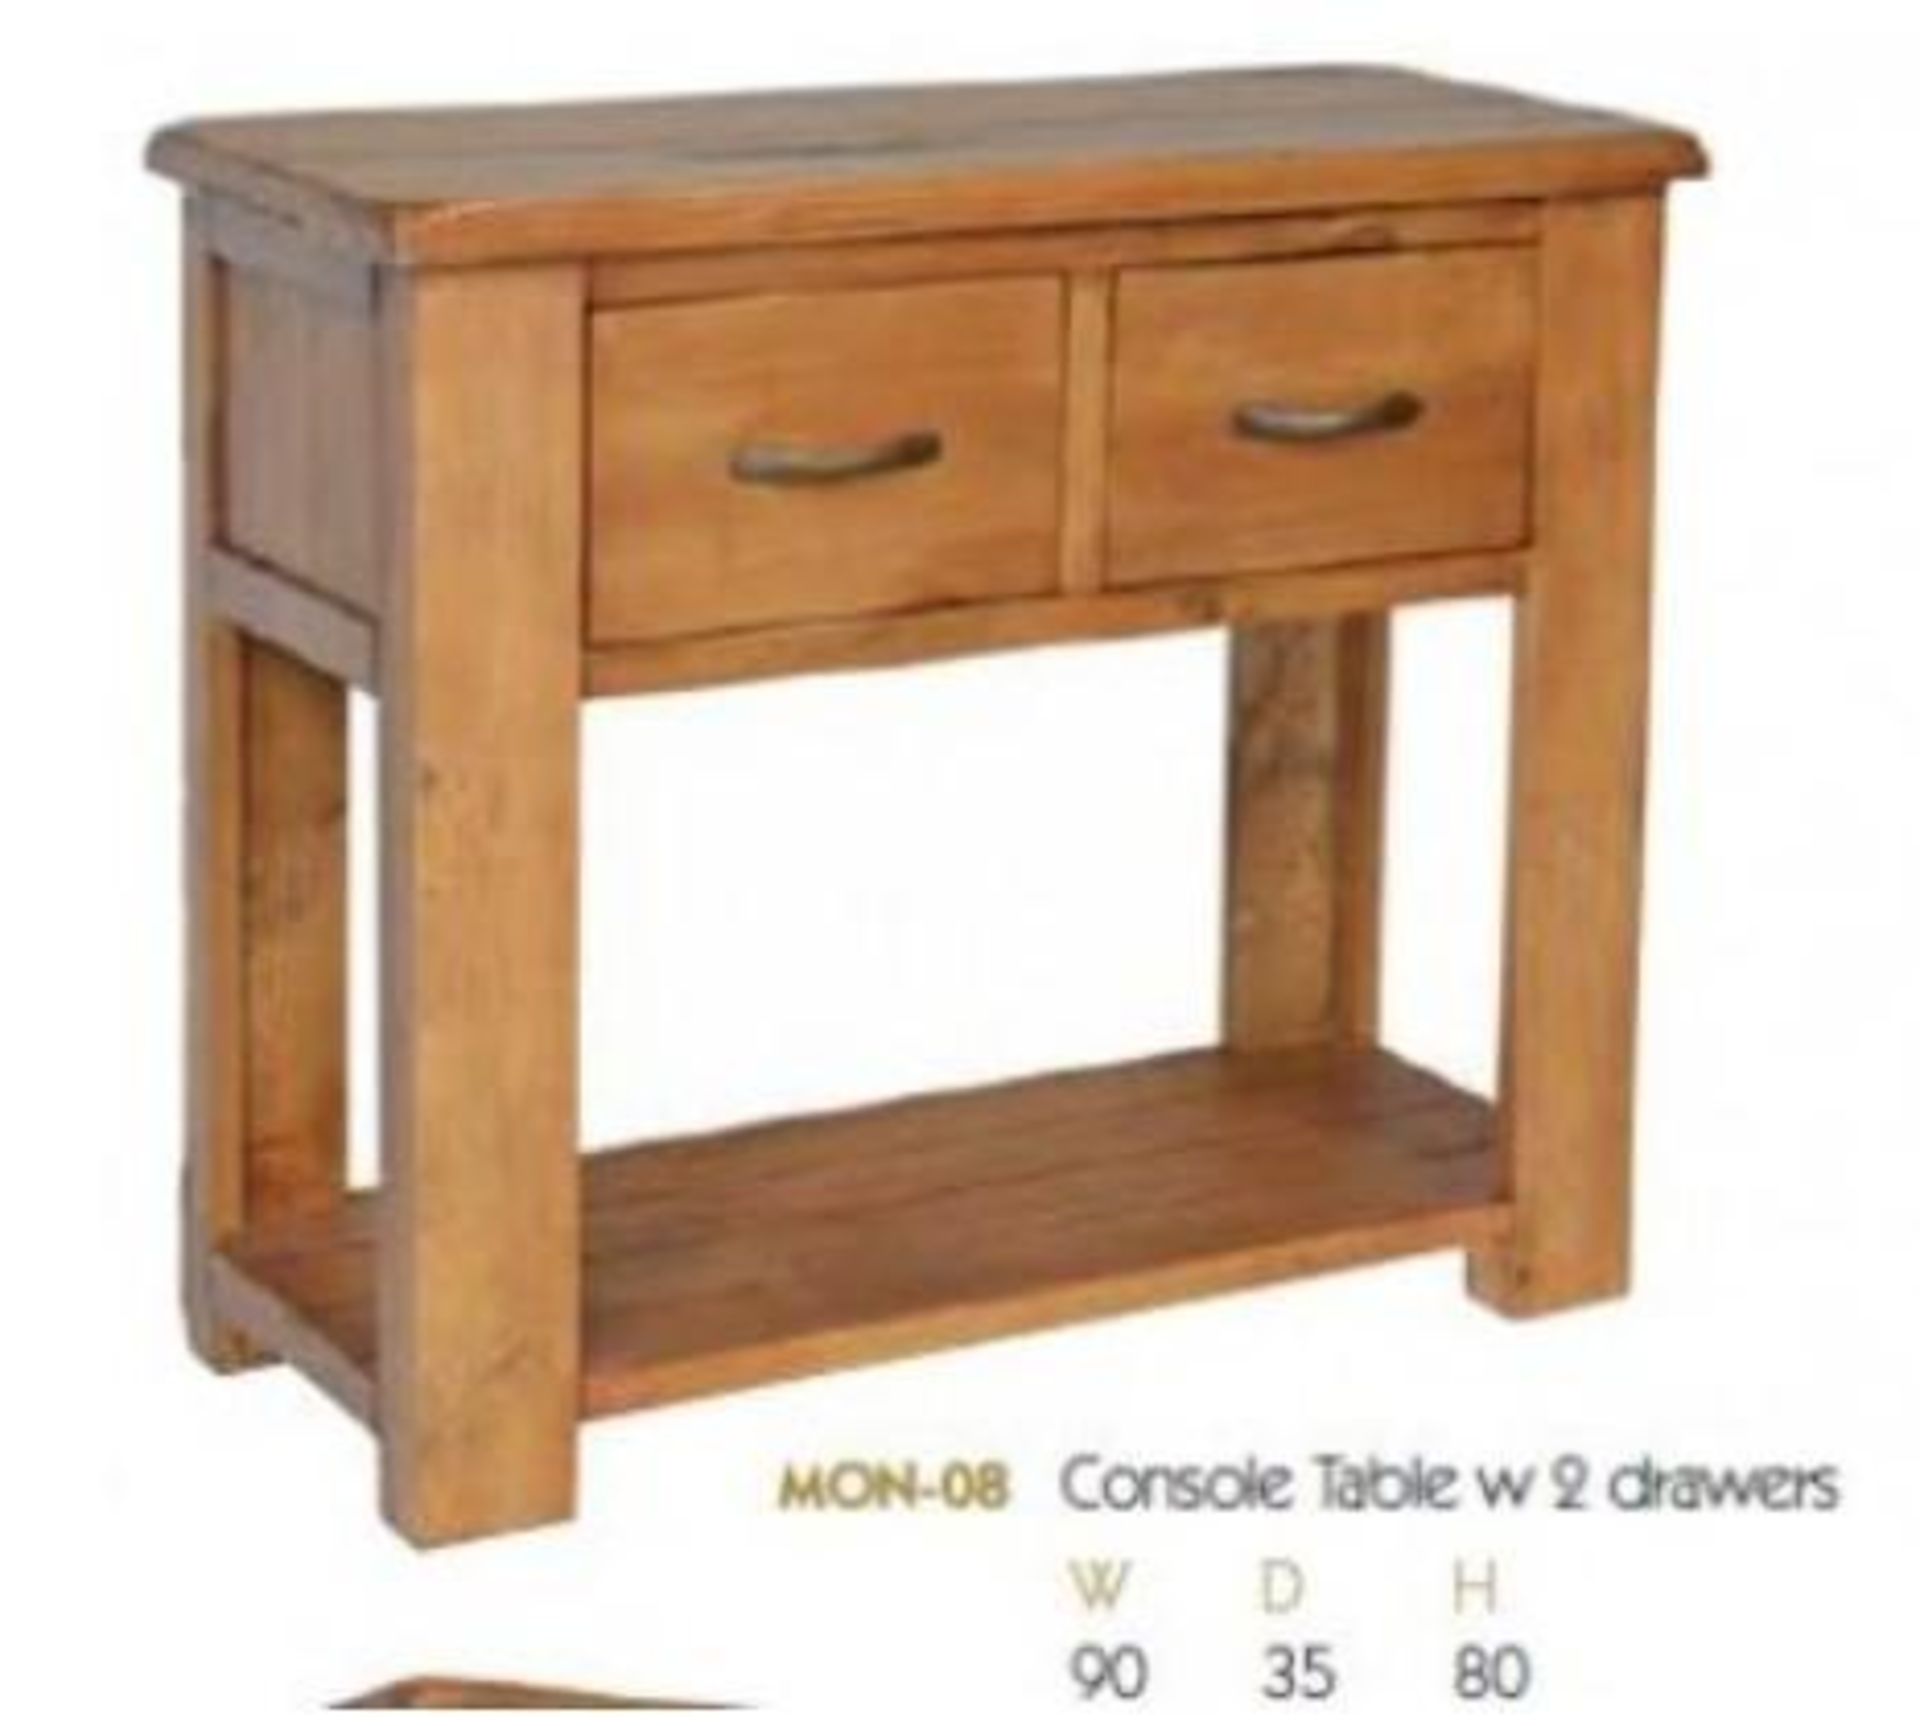 BRAND NEW & BOXED Montana console table